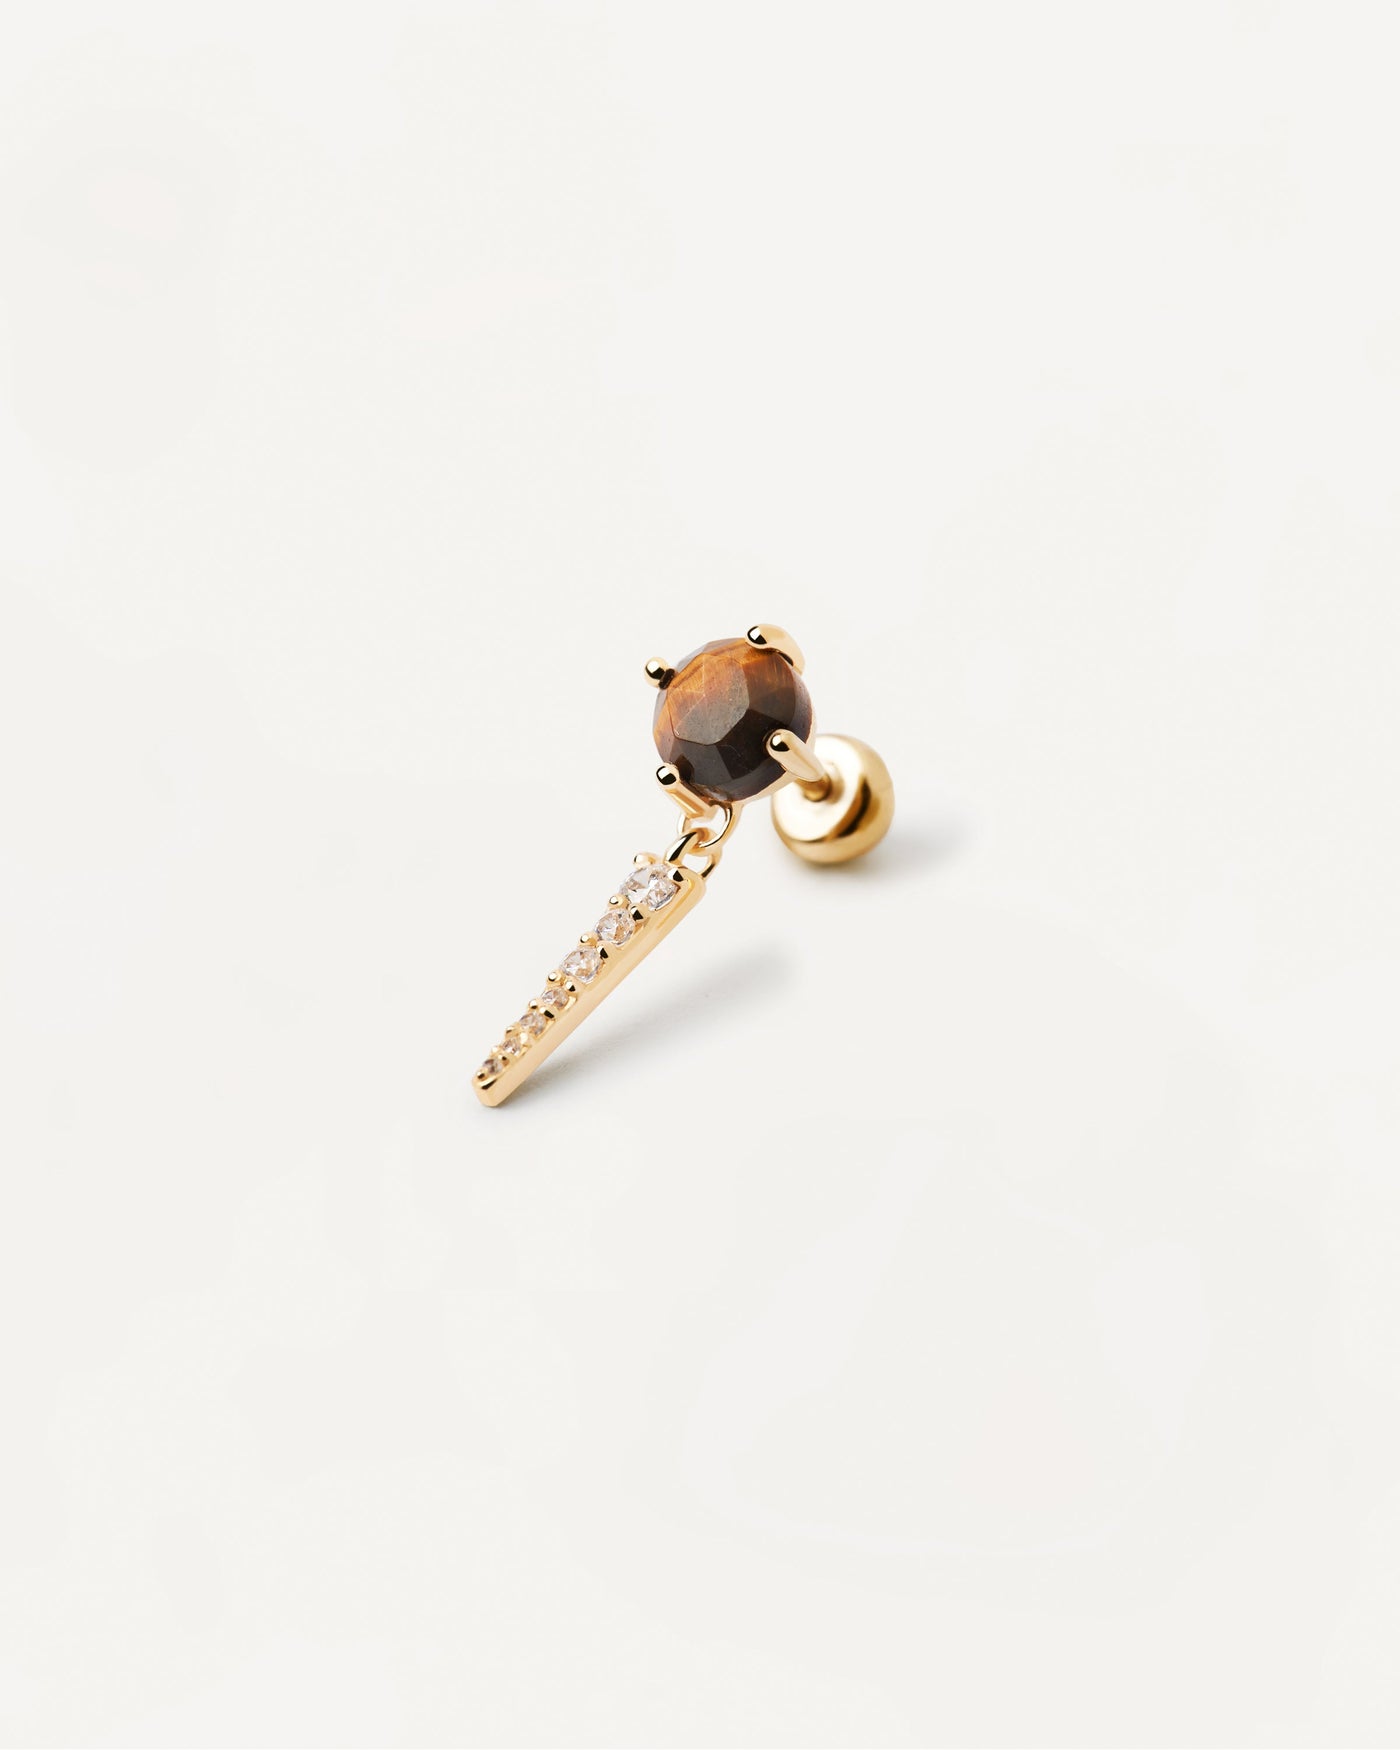 2023 Selection | Yoki Tiger Eye Single Earring. Gold-plated ear piercing with brown gemstone and white zirconia pendant. Get the latest arrival from PDPAOLA. Place your order safely and get this Best Seller. Free Shipping.